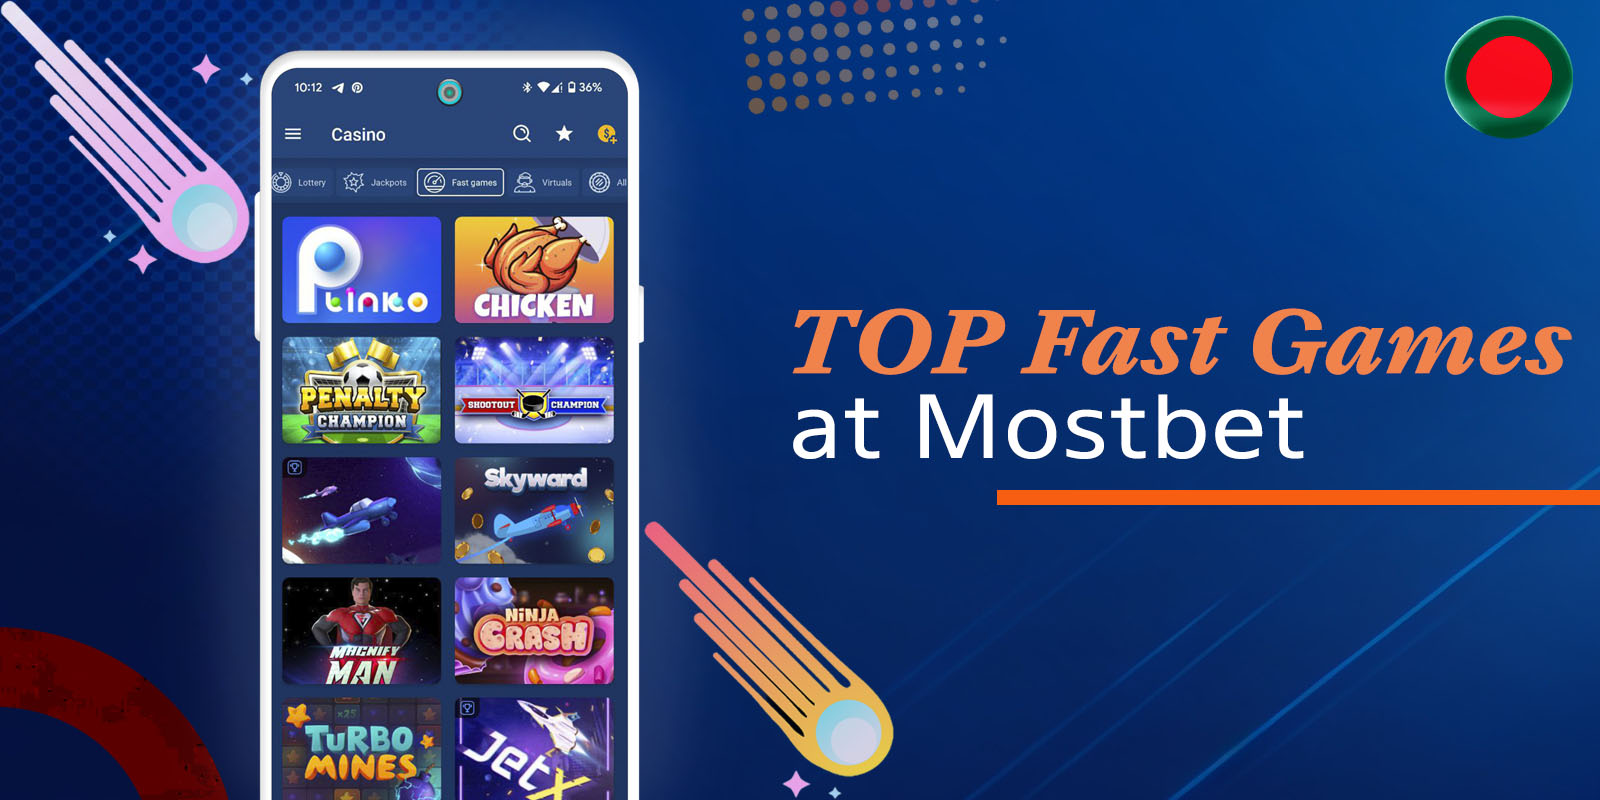 Fast games at Mostbet